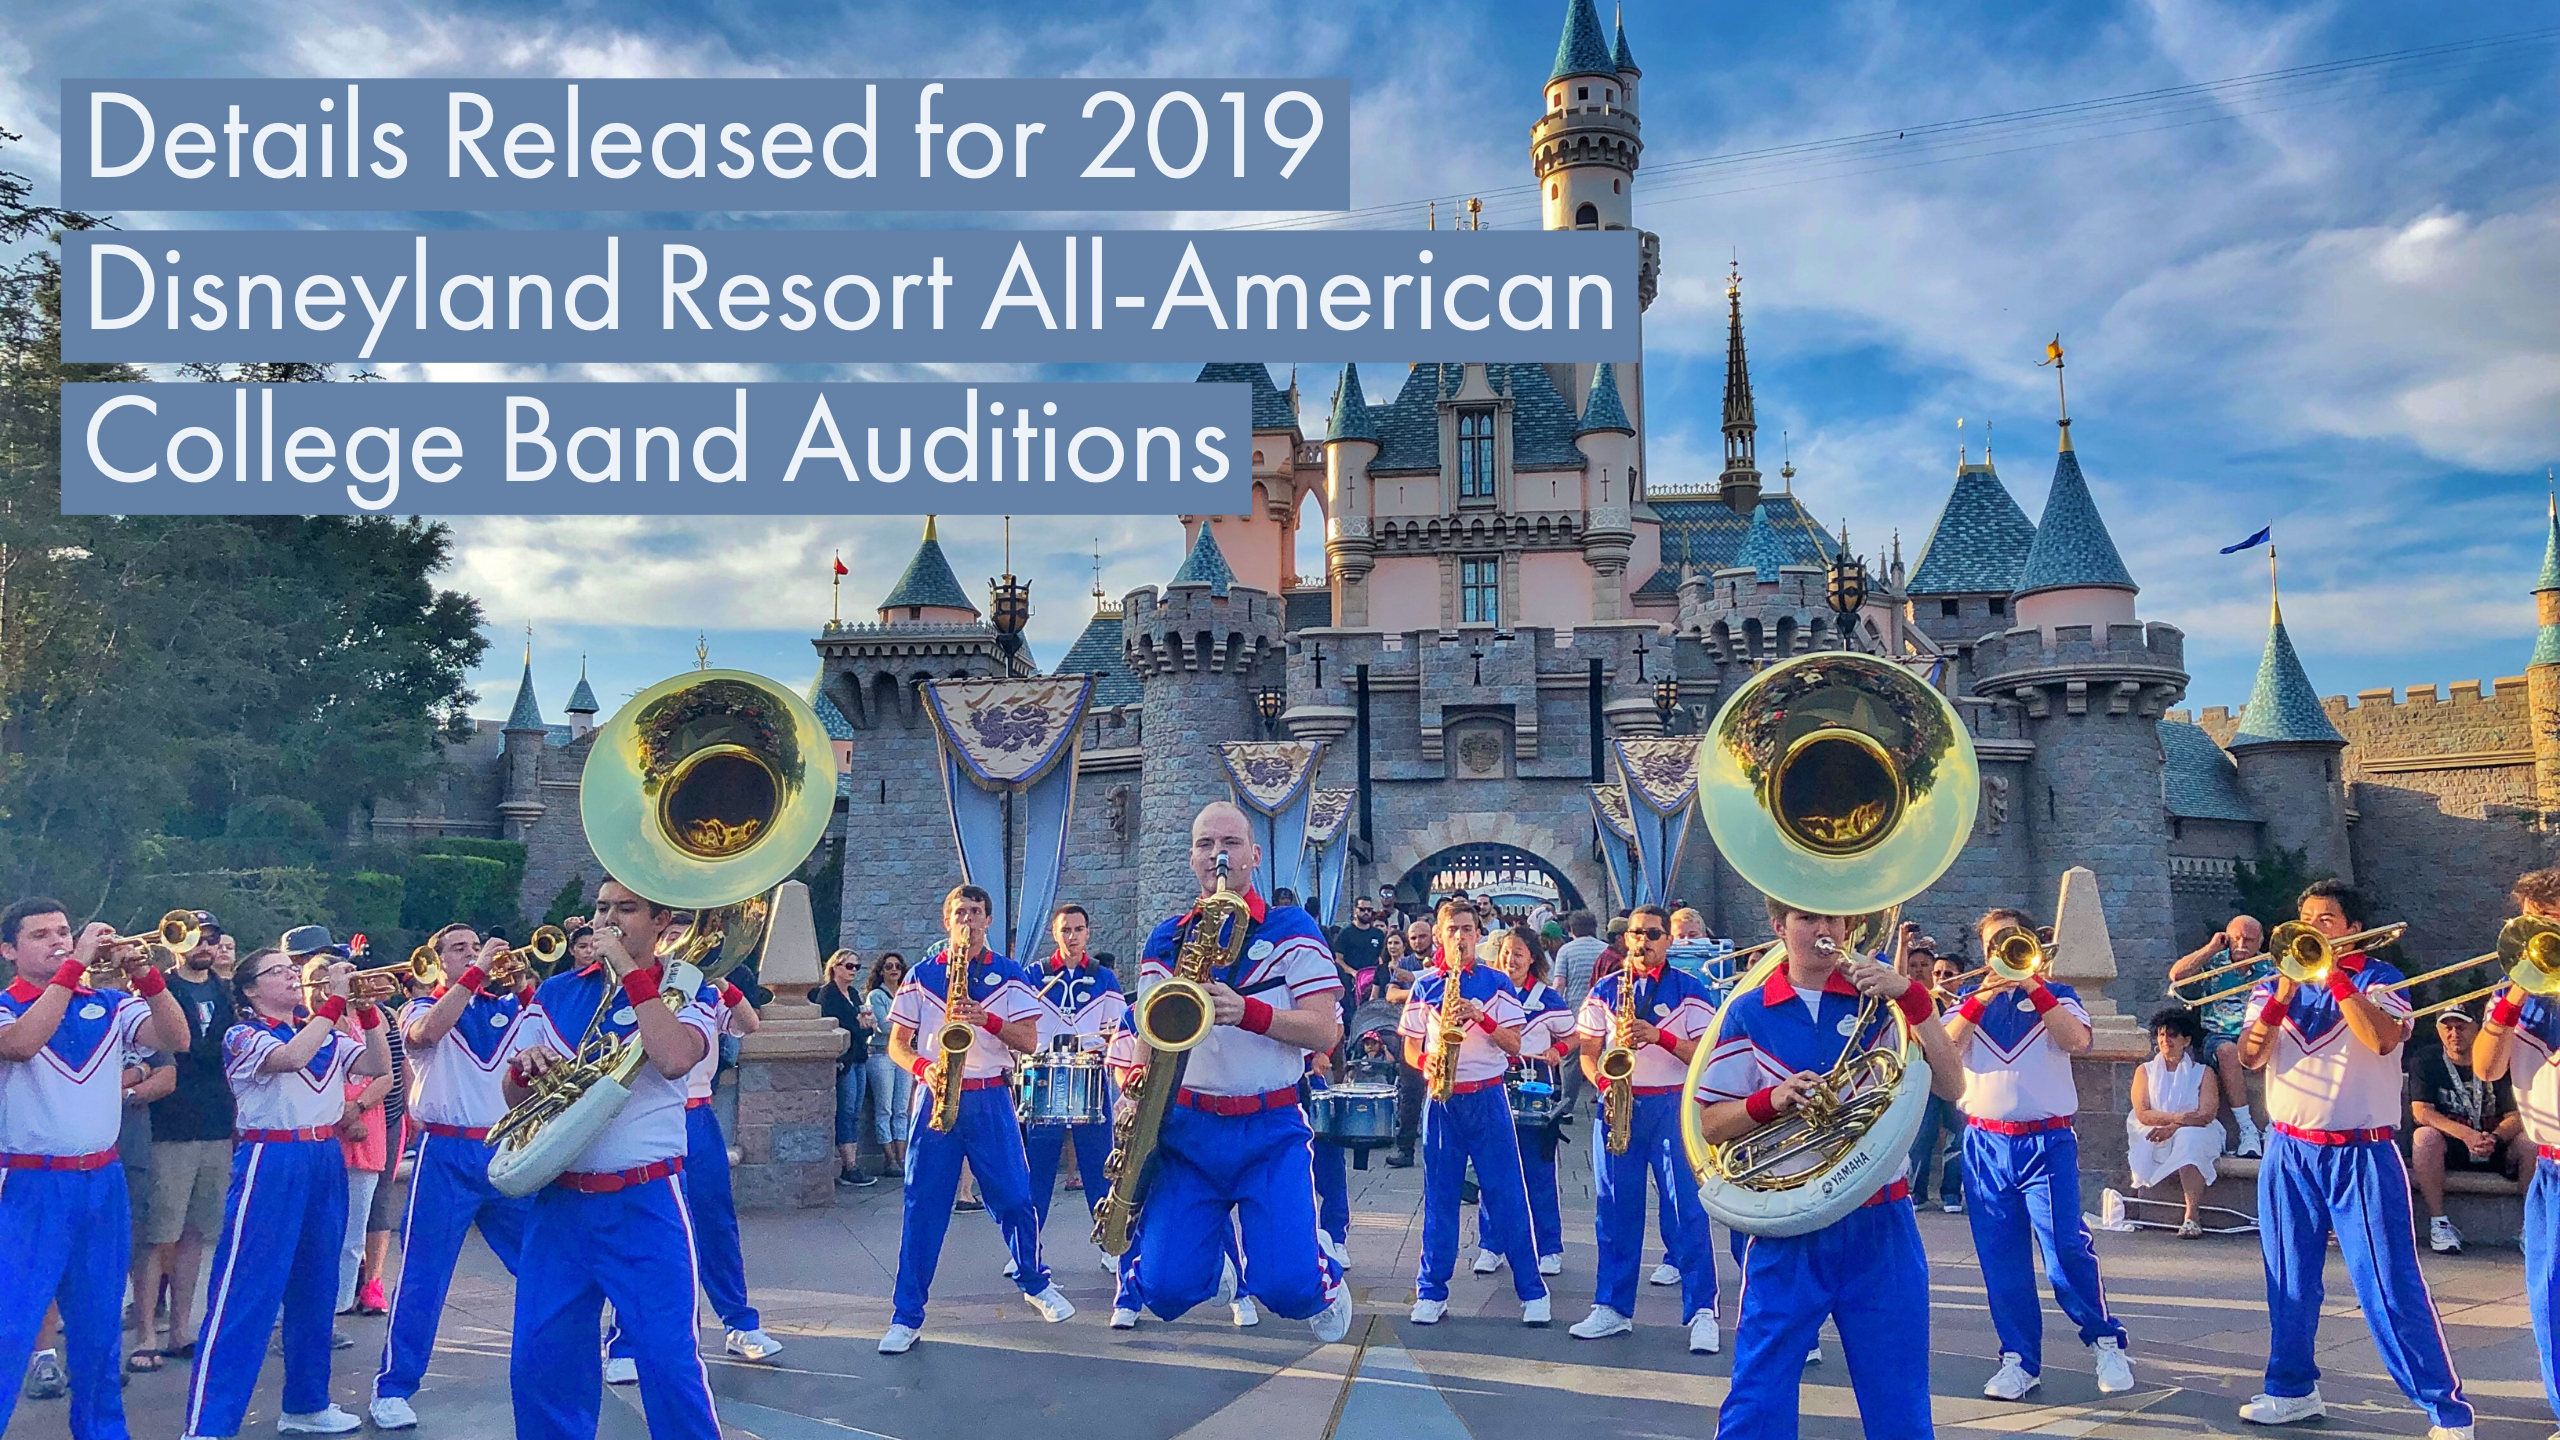 Disneyland Resort All-American College Band Audition Information Released for Those Ready to Make Musical Magic in 2019